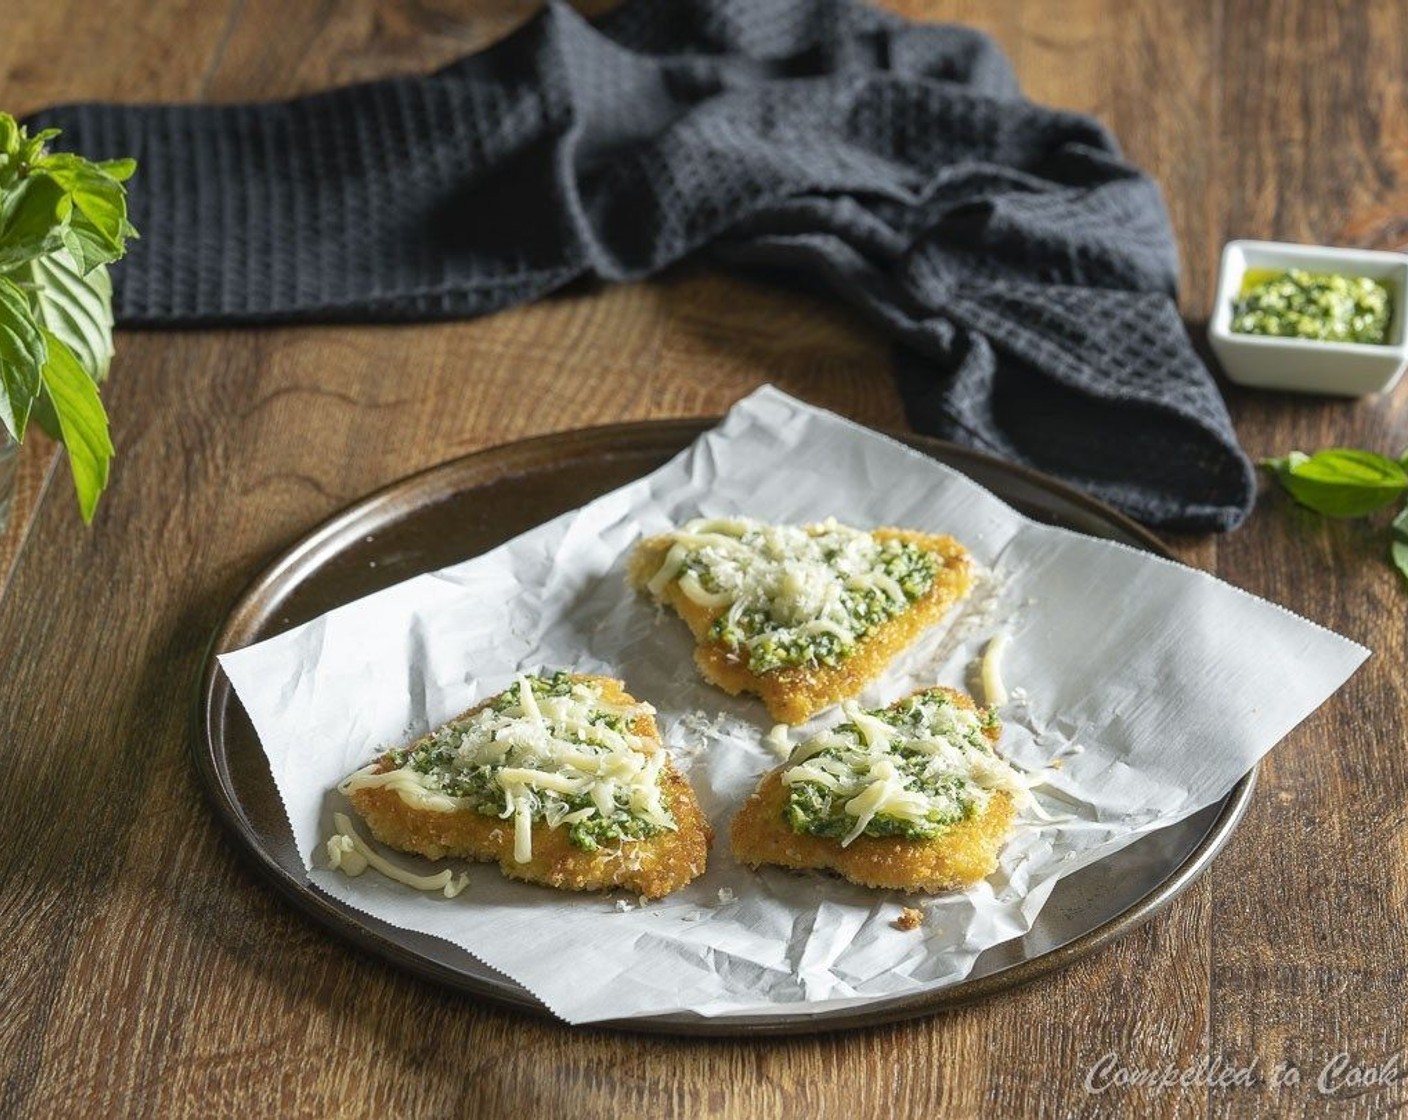 step 8 Arrange cutlets on a foil lined tray. Spread 1 tablspoon of pesto onto each cutlet and sprinkle lightly with Parmesan Cheese (1/4 cup). Broil for 1 to 2 minutes, until cheese is bubbly.